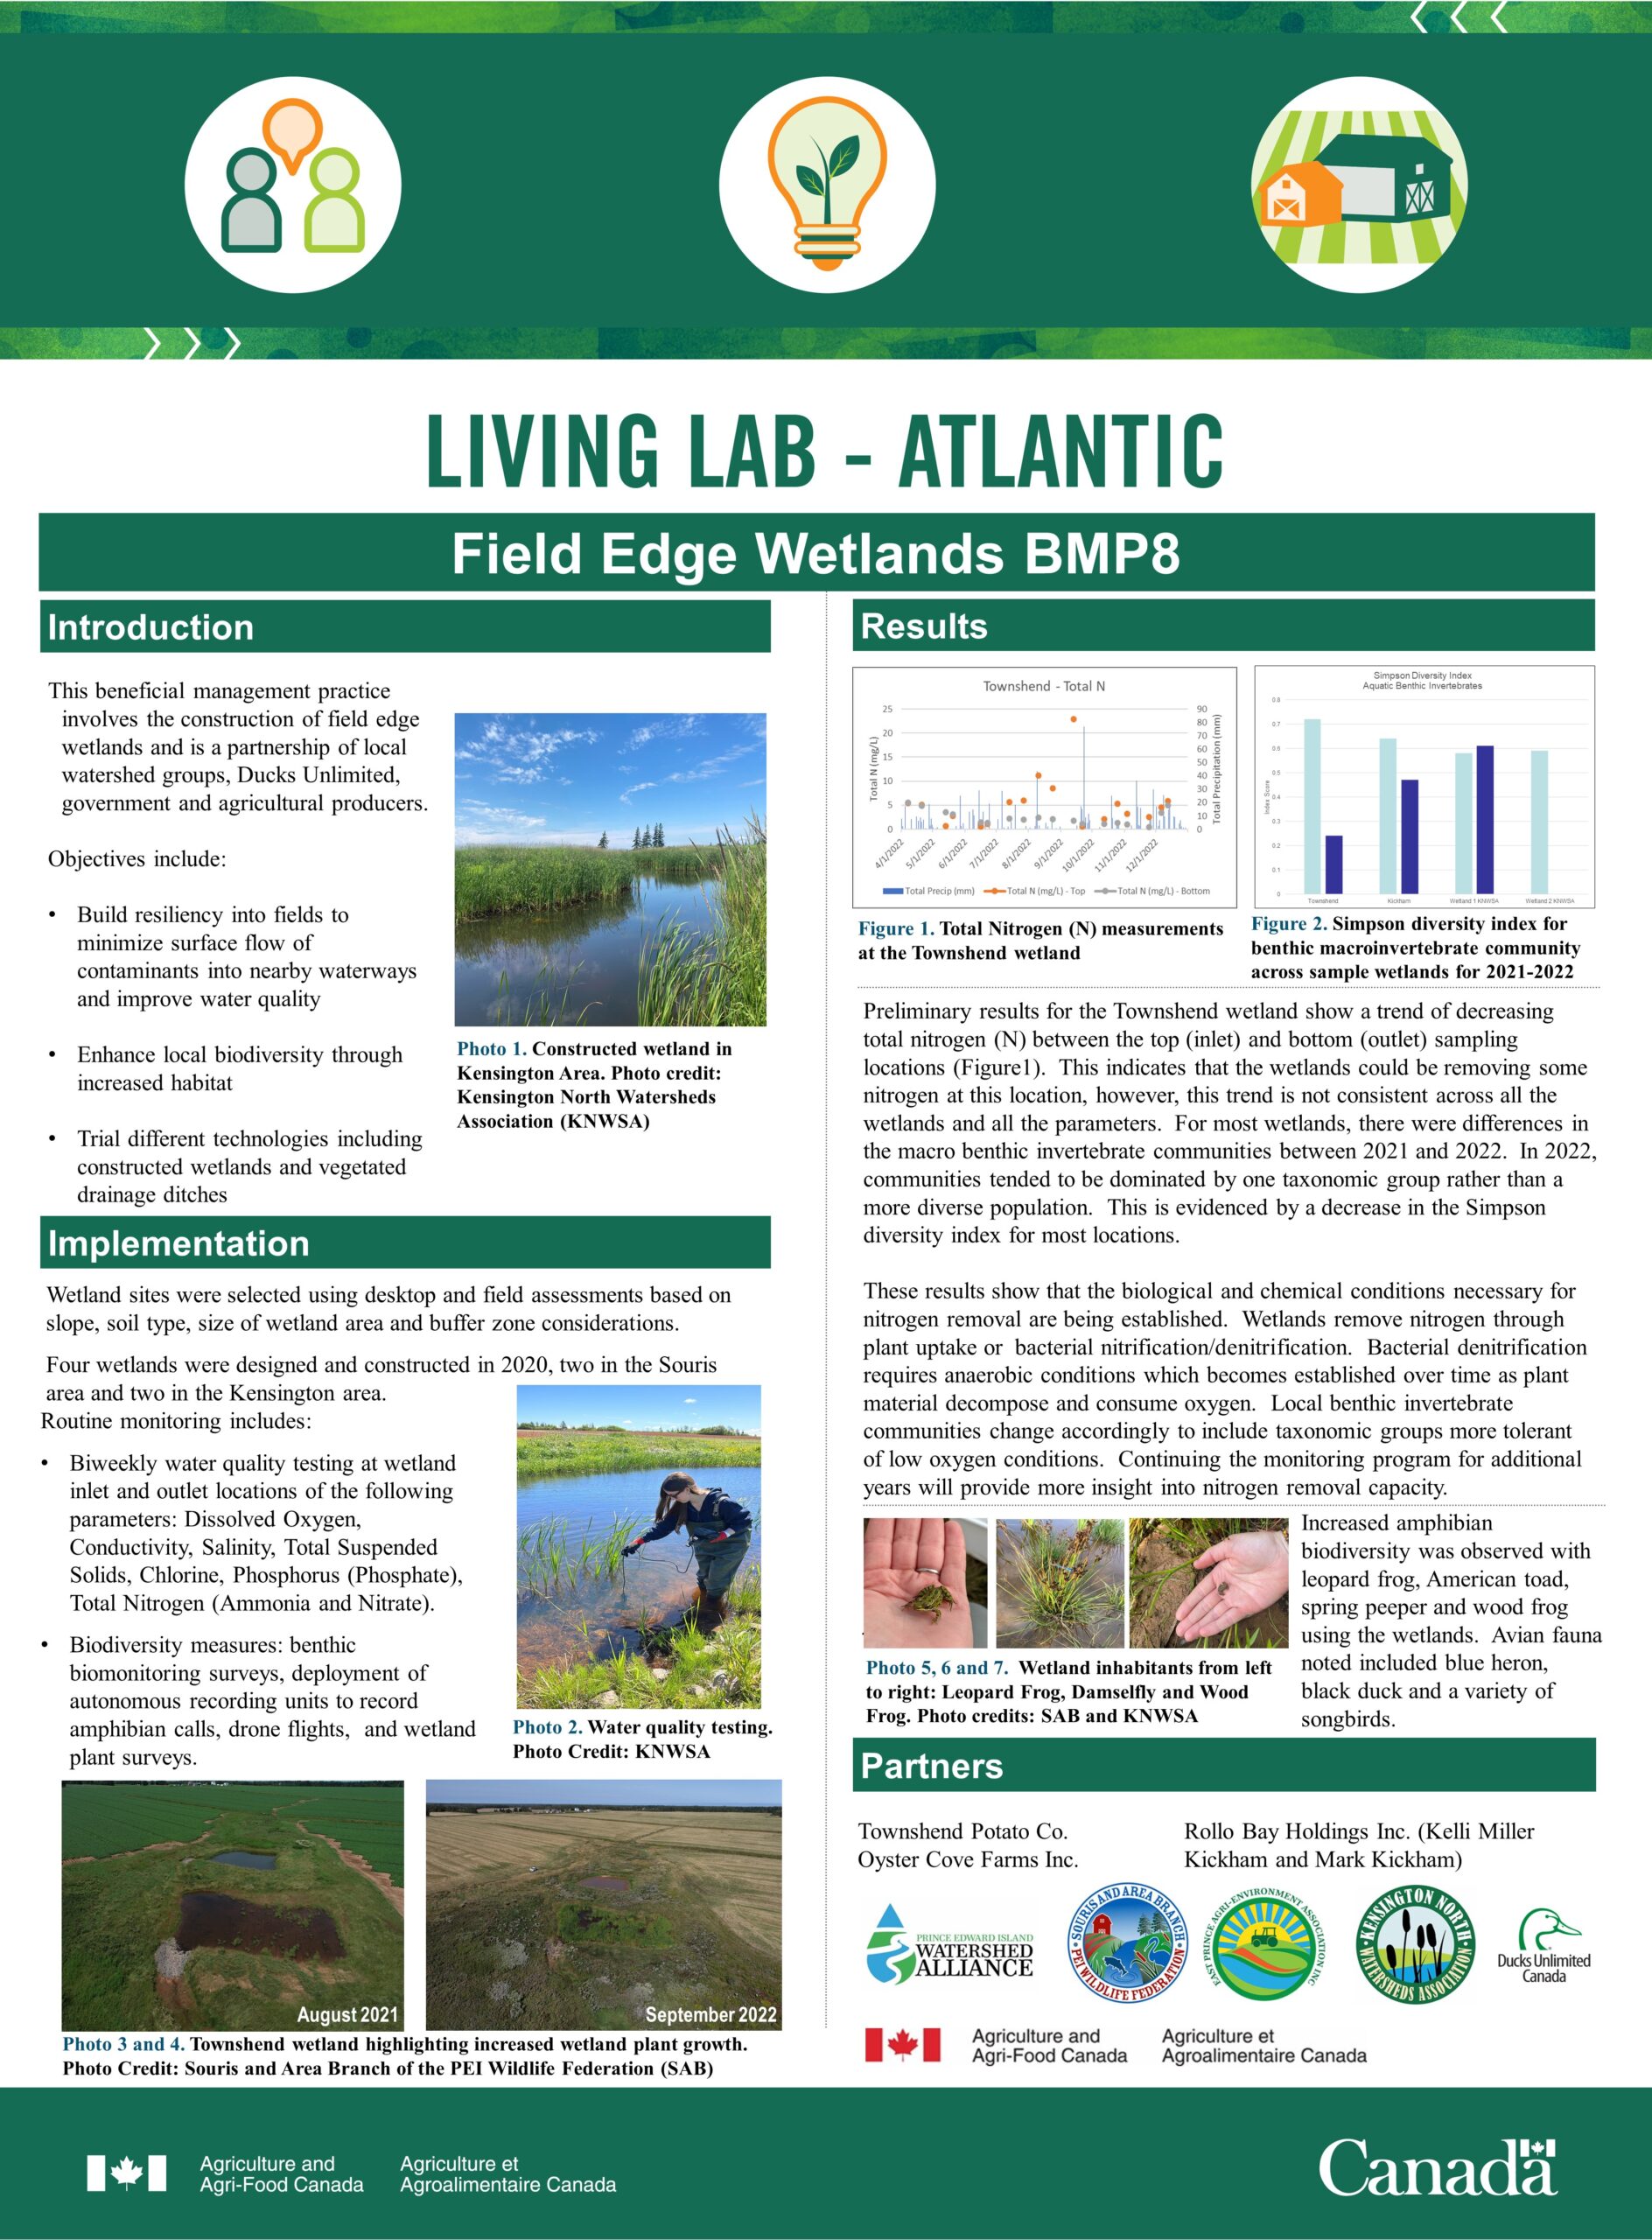 LL ATL BMP8 2023 Poster Presentation March 20 2023 Scaled 